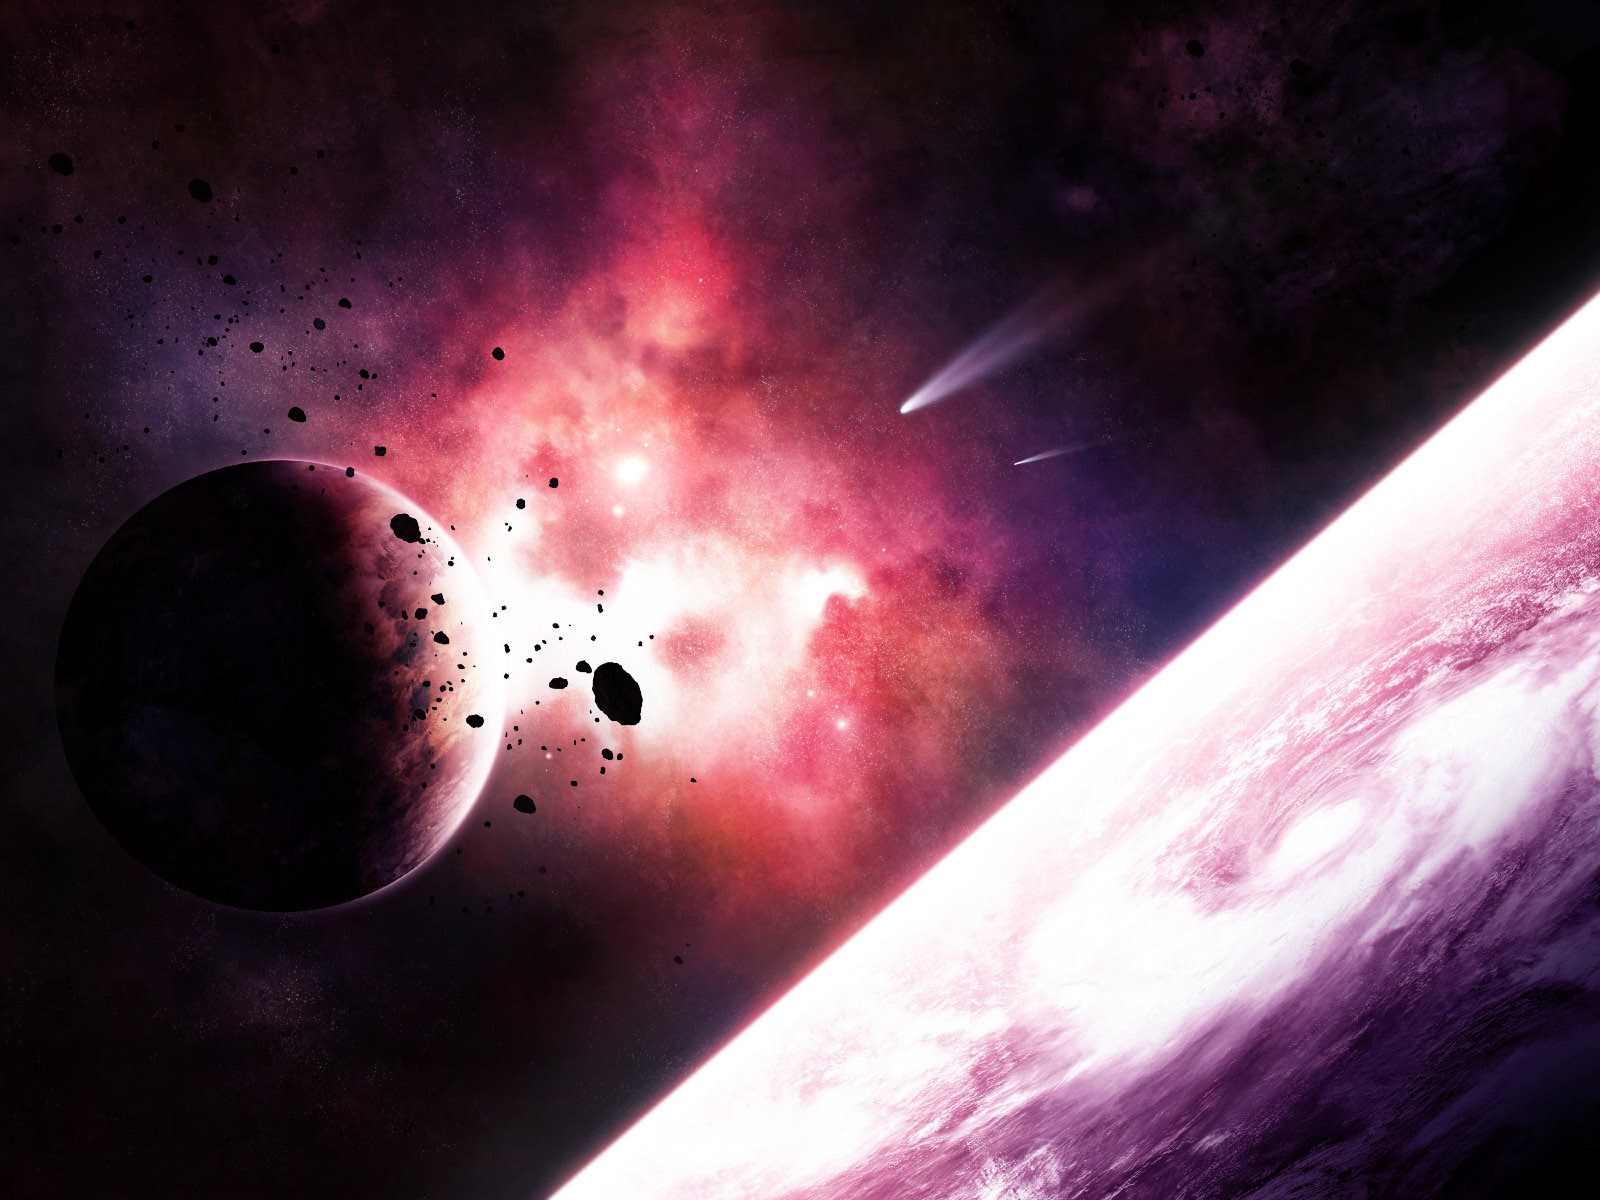 Download High quality 3d Space wallpaper / 3d And Digital Art / 1600x1200